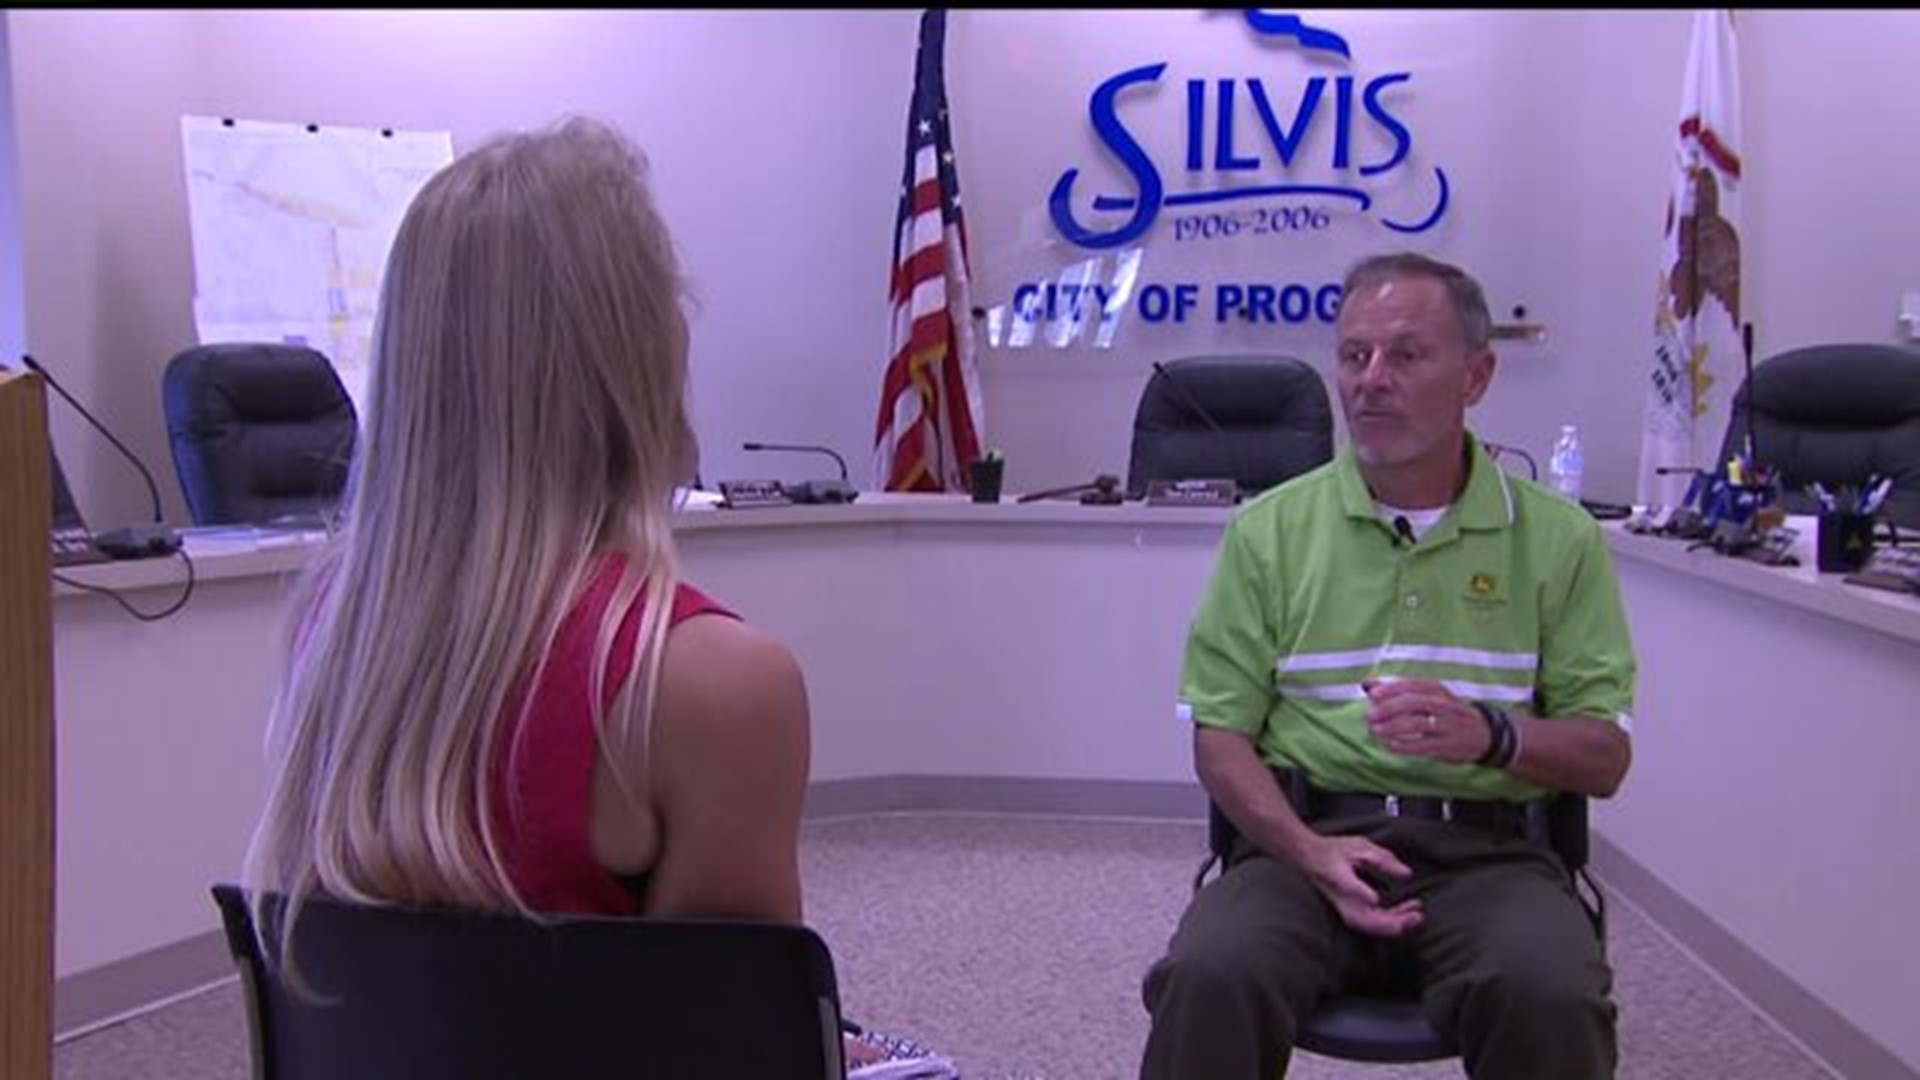 Silvis experience with Walmart courtship